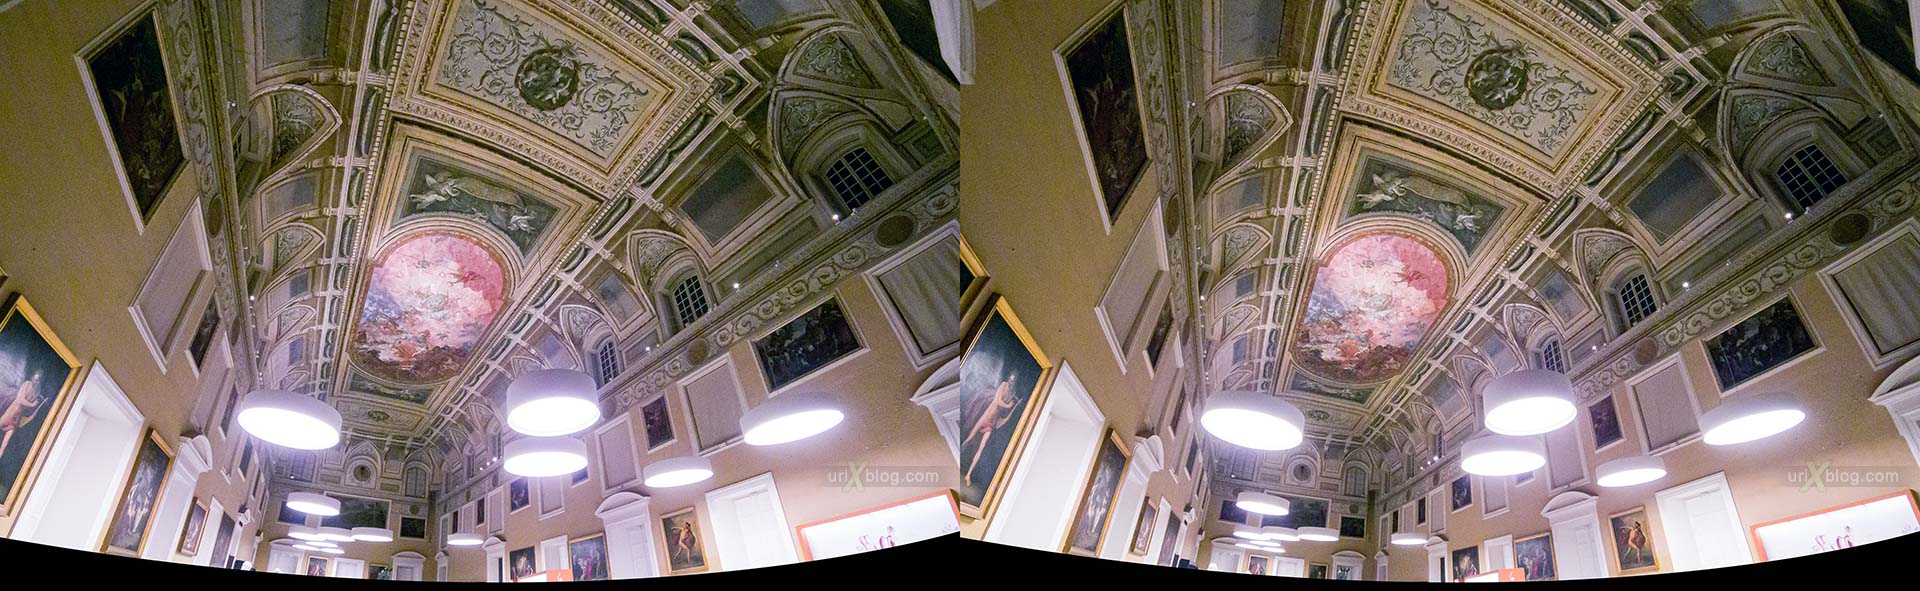 The Hall of the Sundial, ceiling, lamps, painting, National Archaeological Museum of Naples, ancient Rome, Pompei, exhibition, Naples, Italy, 3D, stereo pair, cross-eyed, crossview, cross view stereo pair, stereoscopic